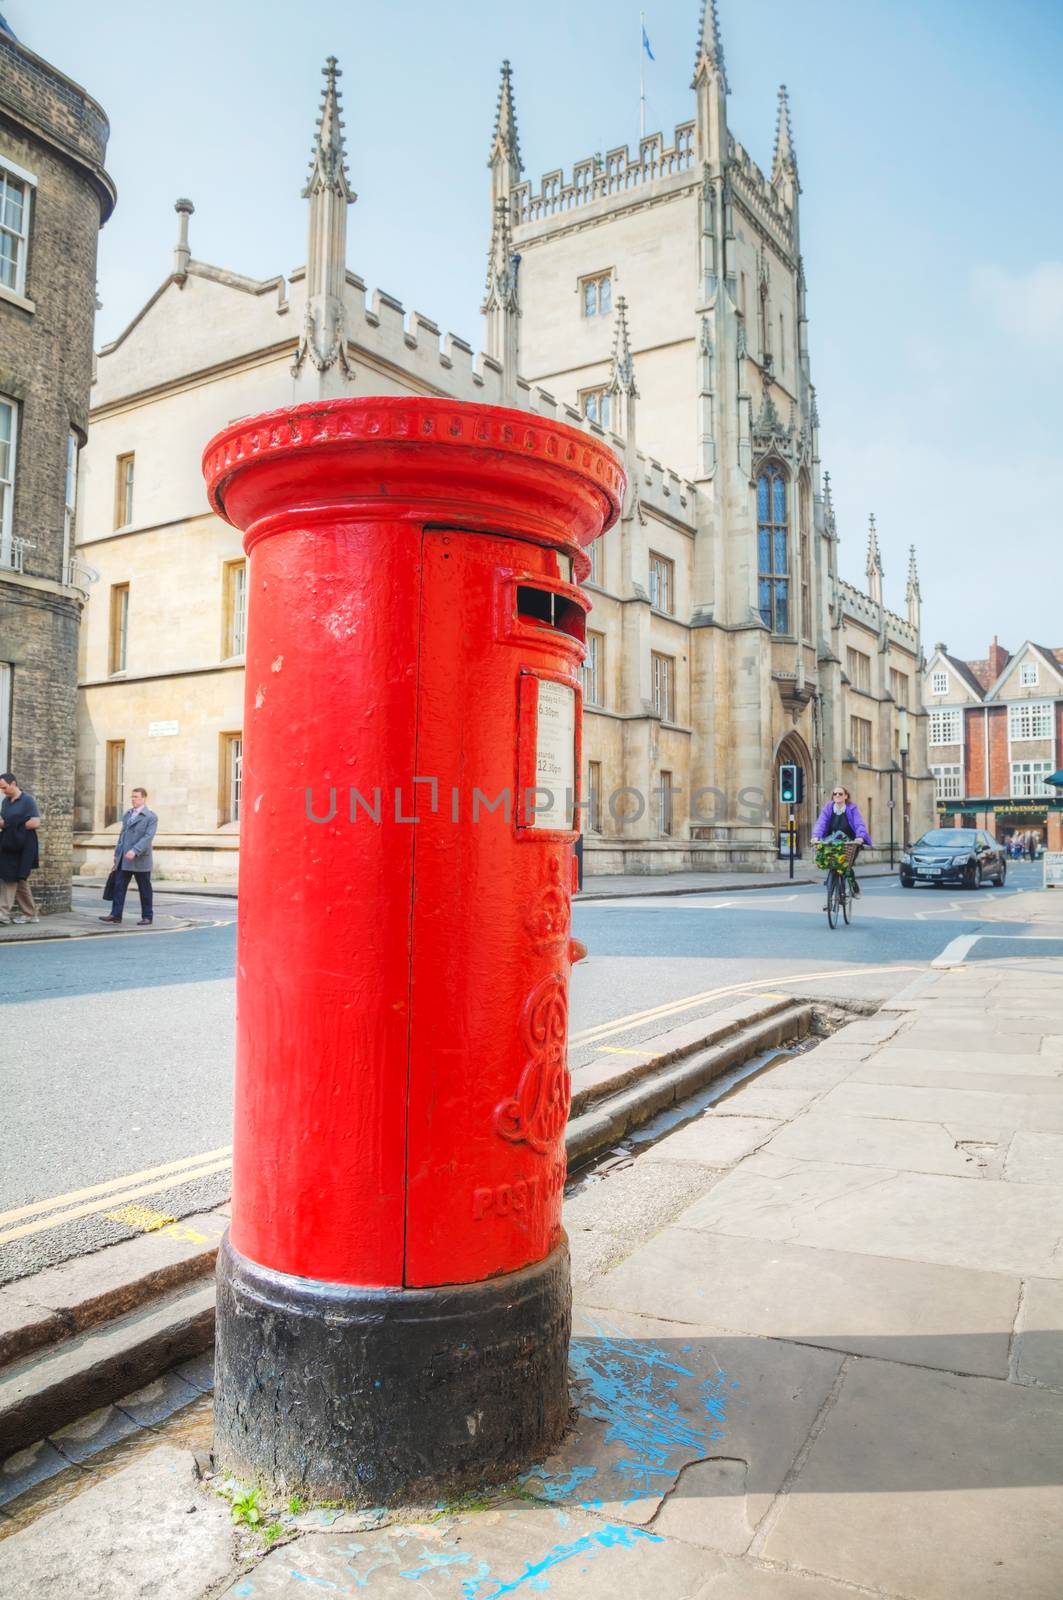 Cambridge, UK - April 9: Famous red post box in Cambridge, UK. It's a physical box into which members of the public can deposit outgoing mail intended for collection by the agents of a country's postal service.